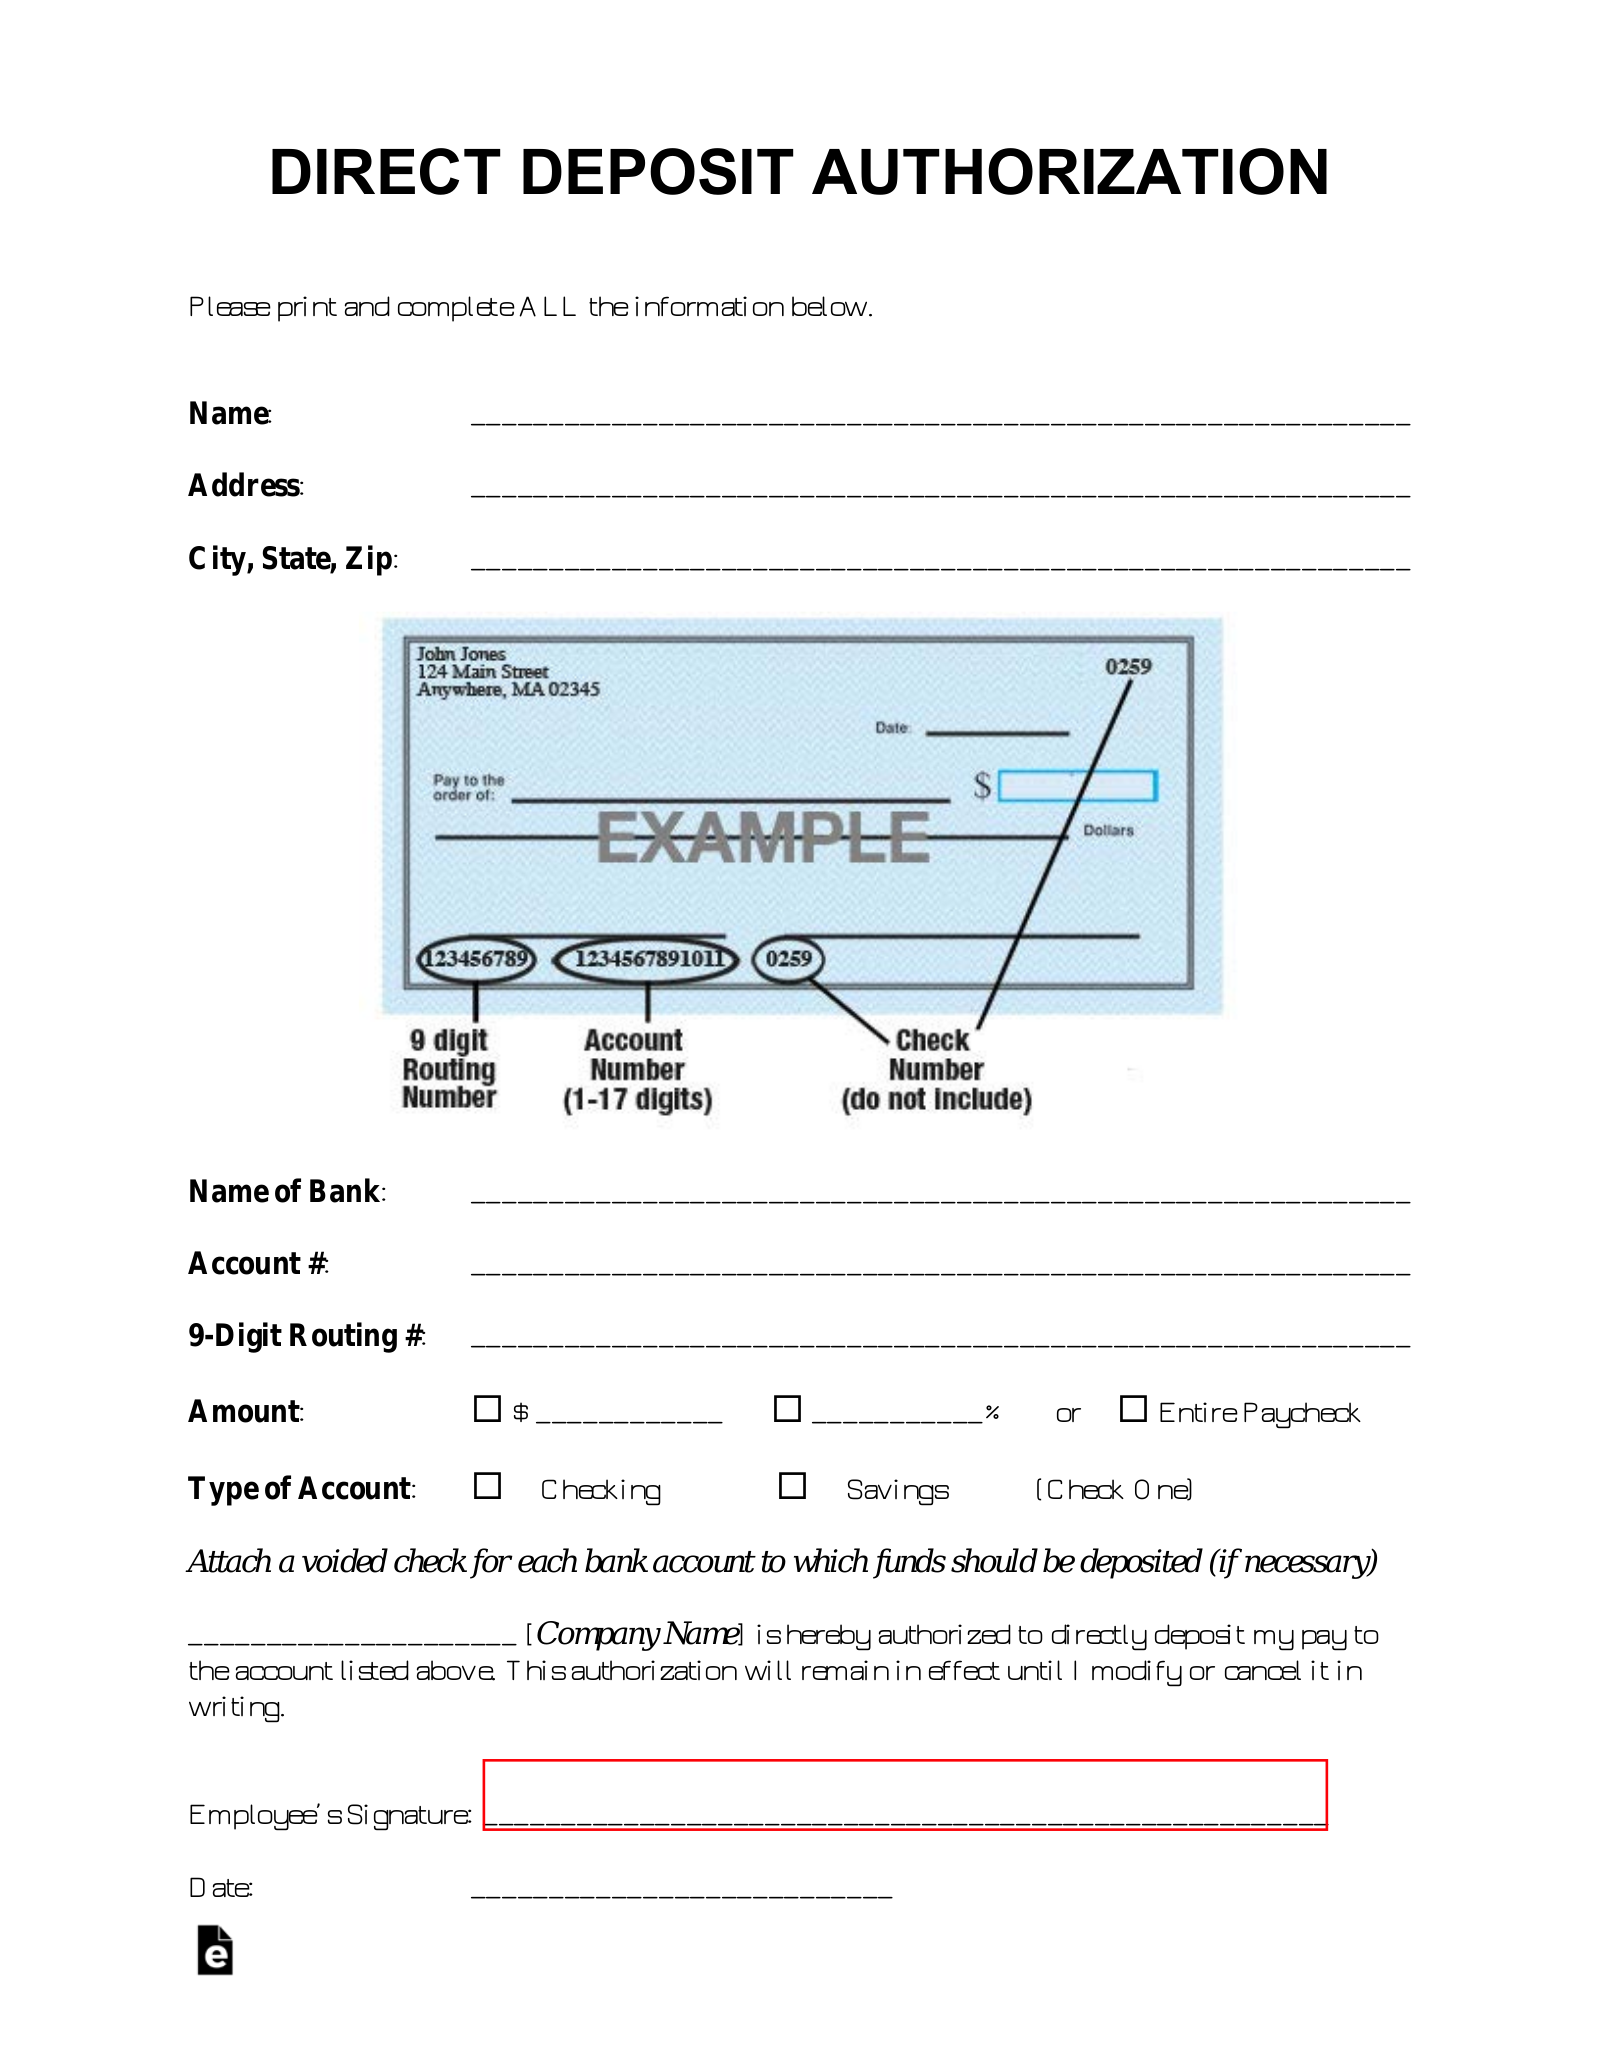 Direct Deposit Authorization Forms (22)